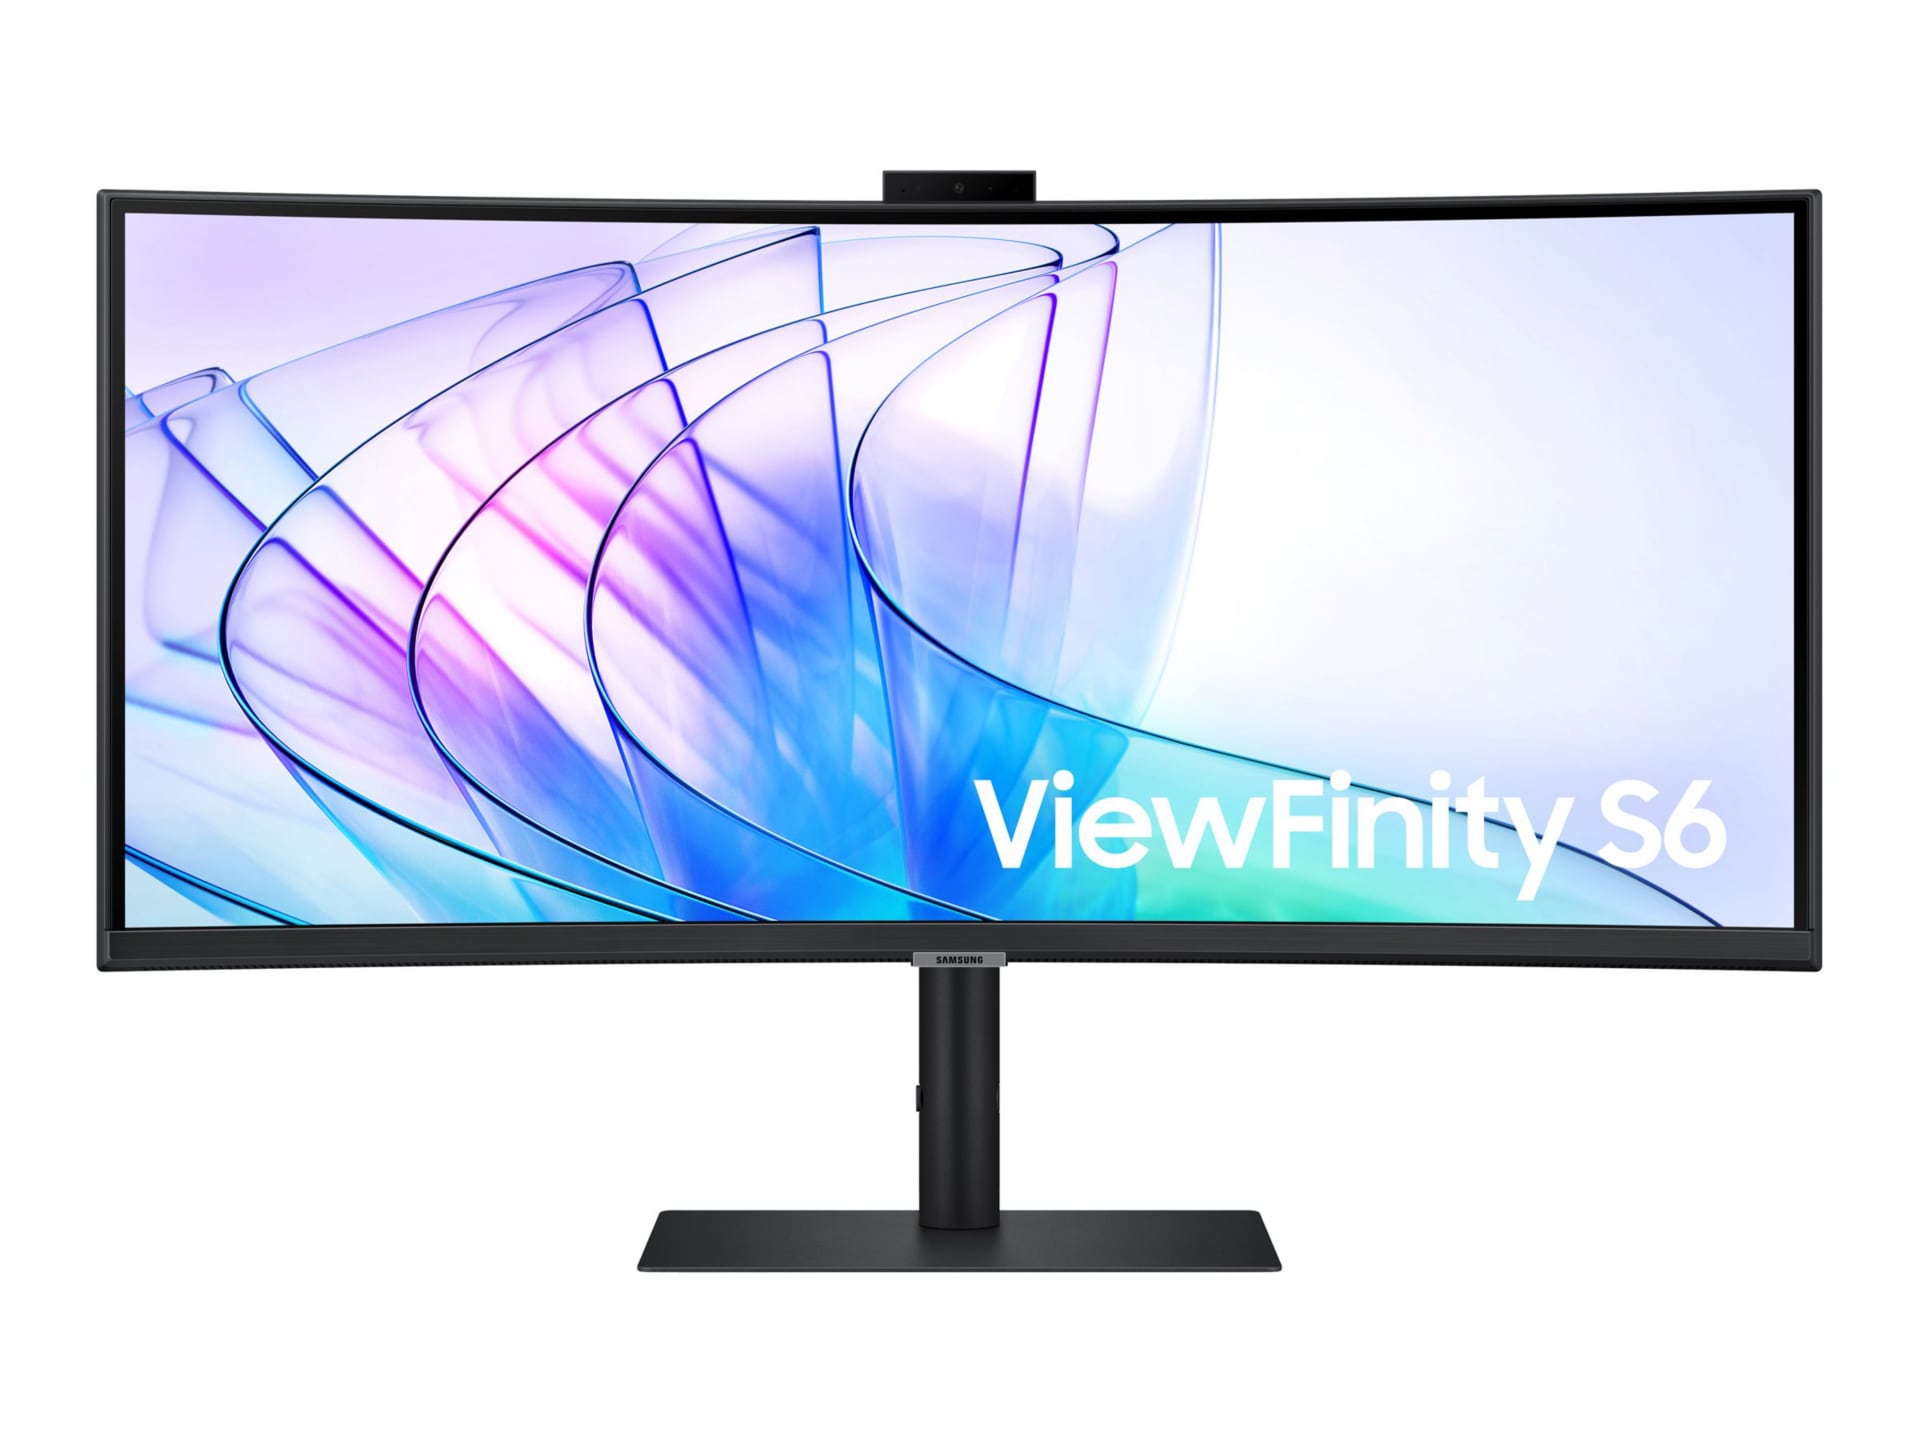 Samsung ViewFinity S6 S34C654VAN - S65VC Series - LED monitor - curved - 34